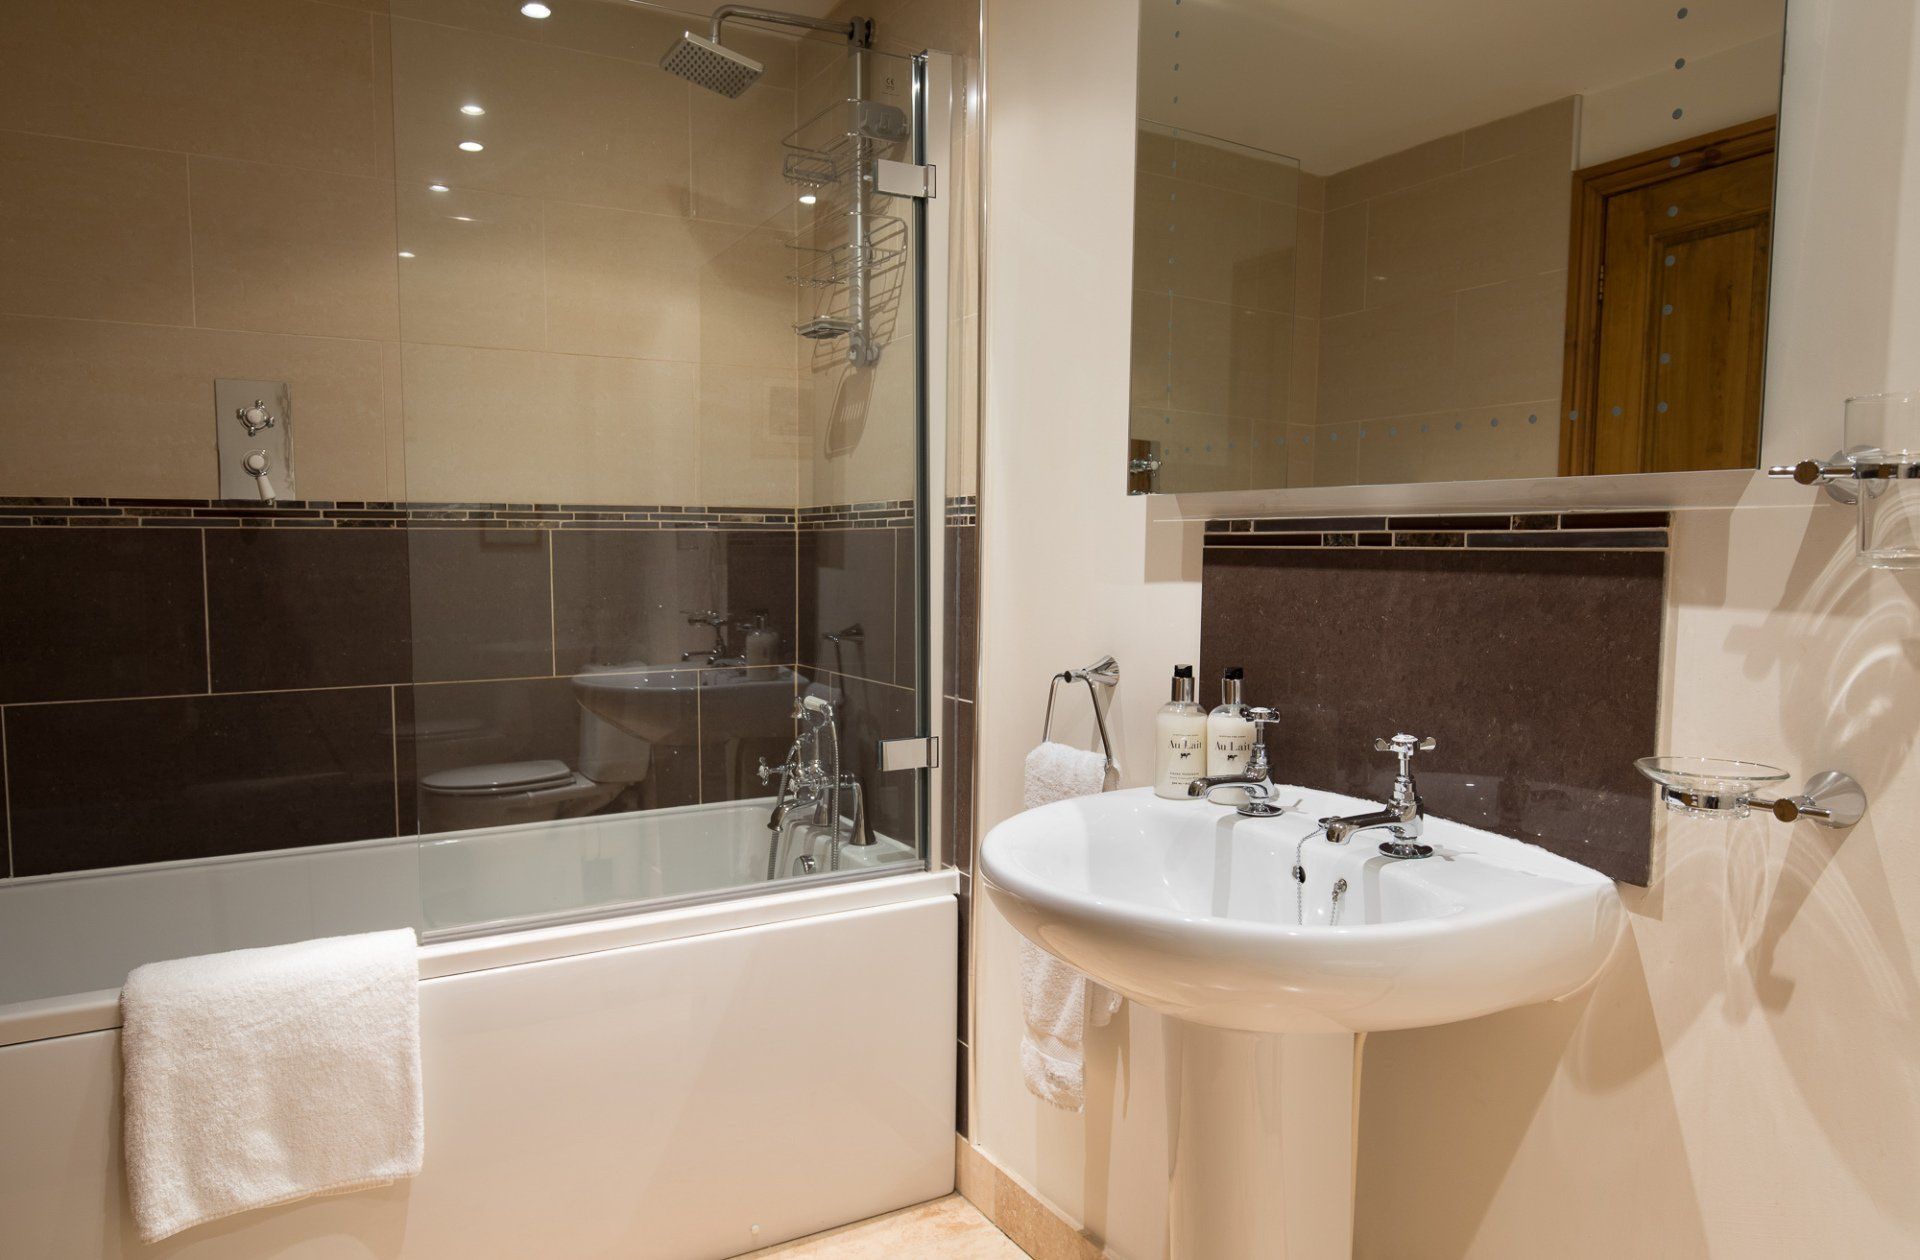 Loand House Court, Cruck Cottage, Ensuite Bathroom, Complimentary Toiletries, Fluffy Soft Towels